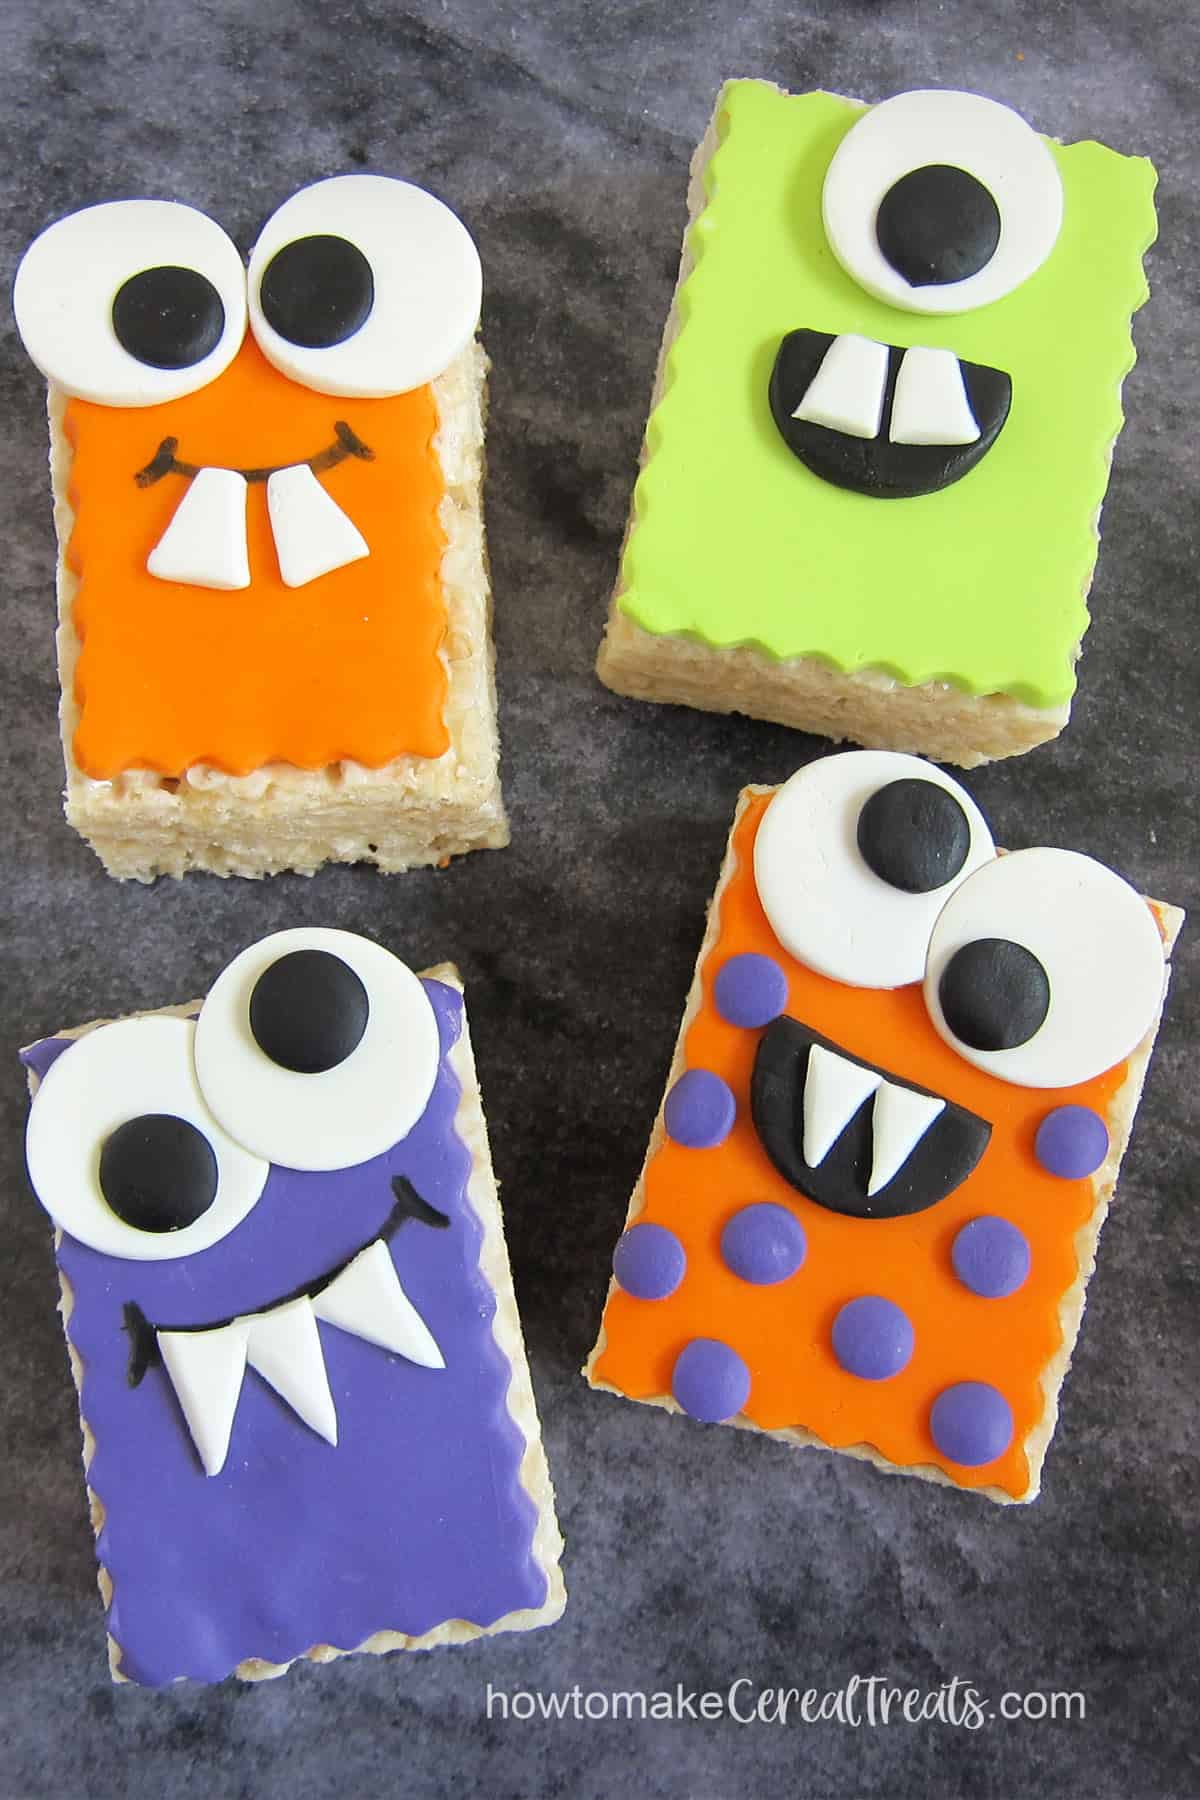 Rice Krispie Treat Monsters decorated with colorful modeling chocolate.